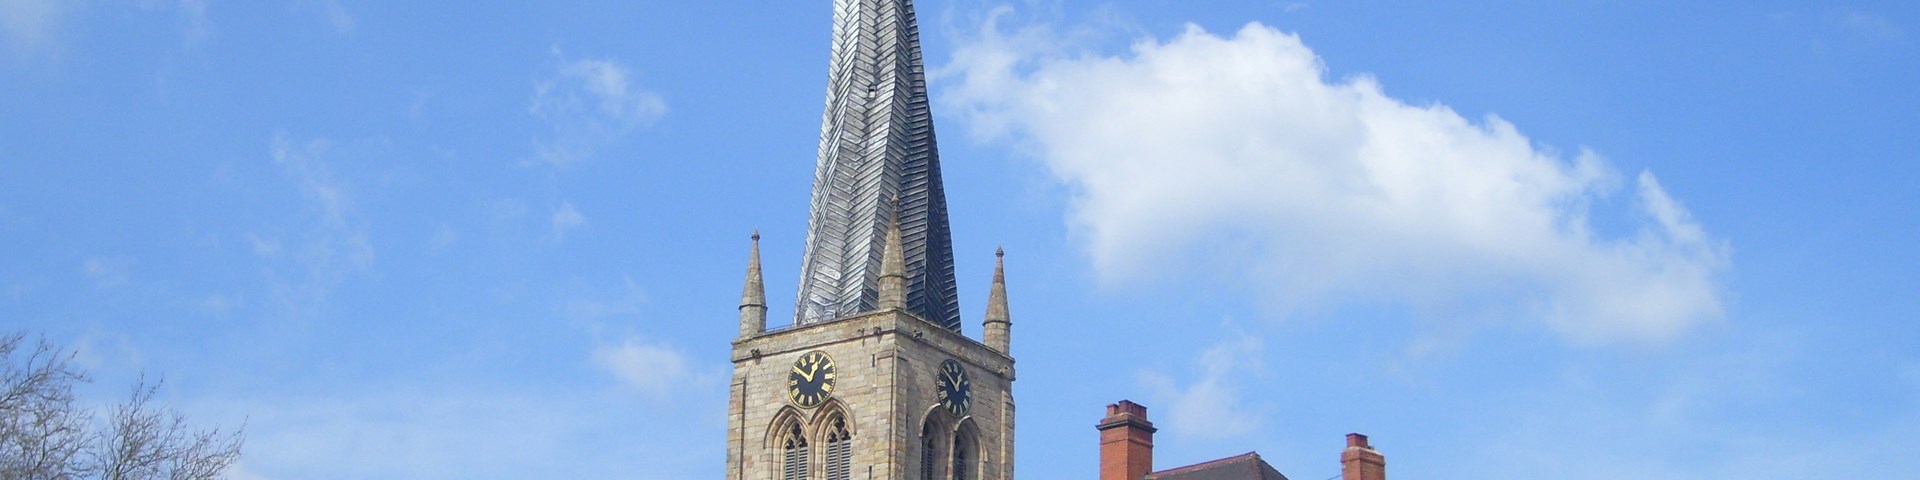 Chesterfield local landmark - Chesterfield Parish Church well known for its crooked and pointed roof.